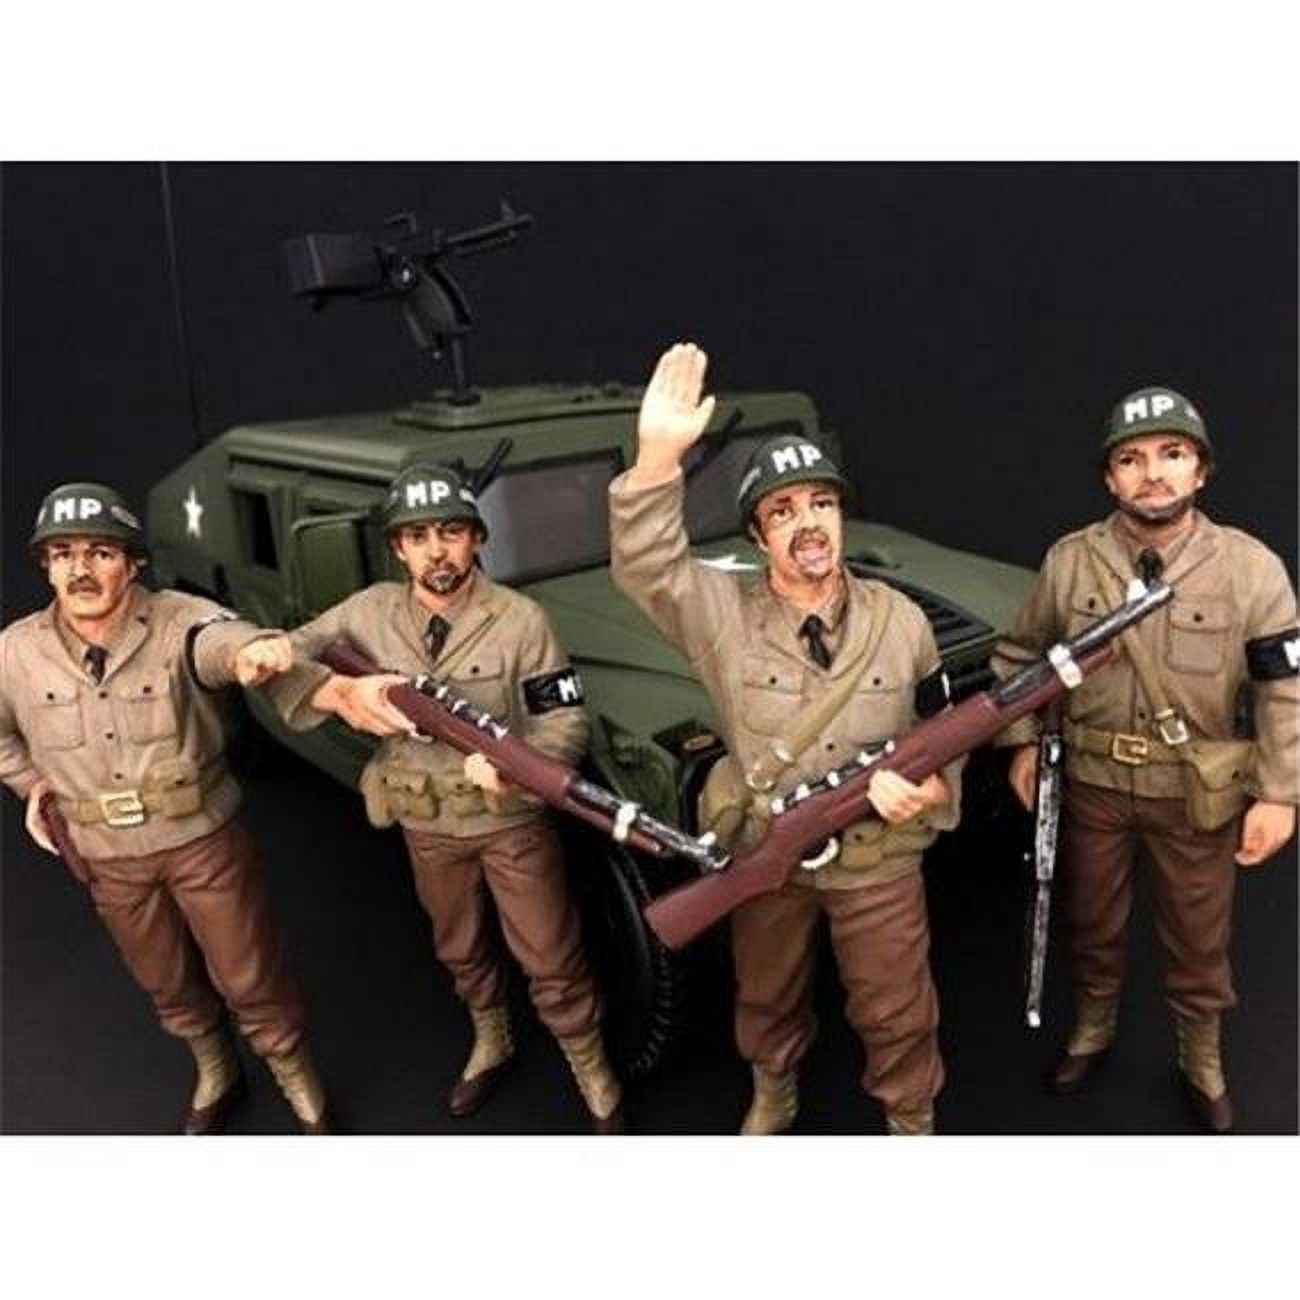 77414-77415-77416-77417 Wwii Military Police 4 Piece Figure Set For 1-18 Scale Models